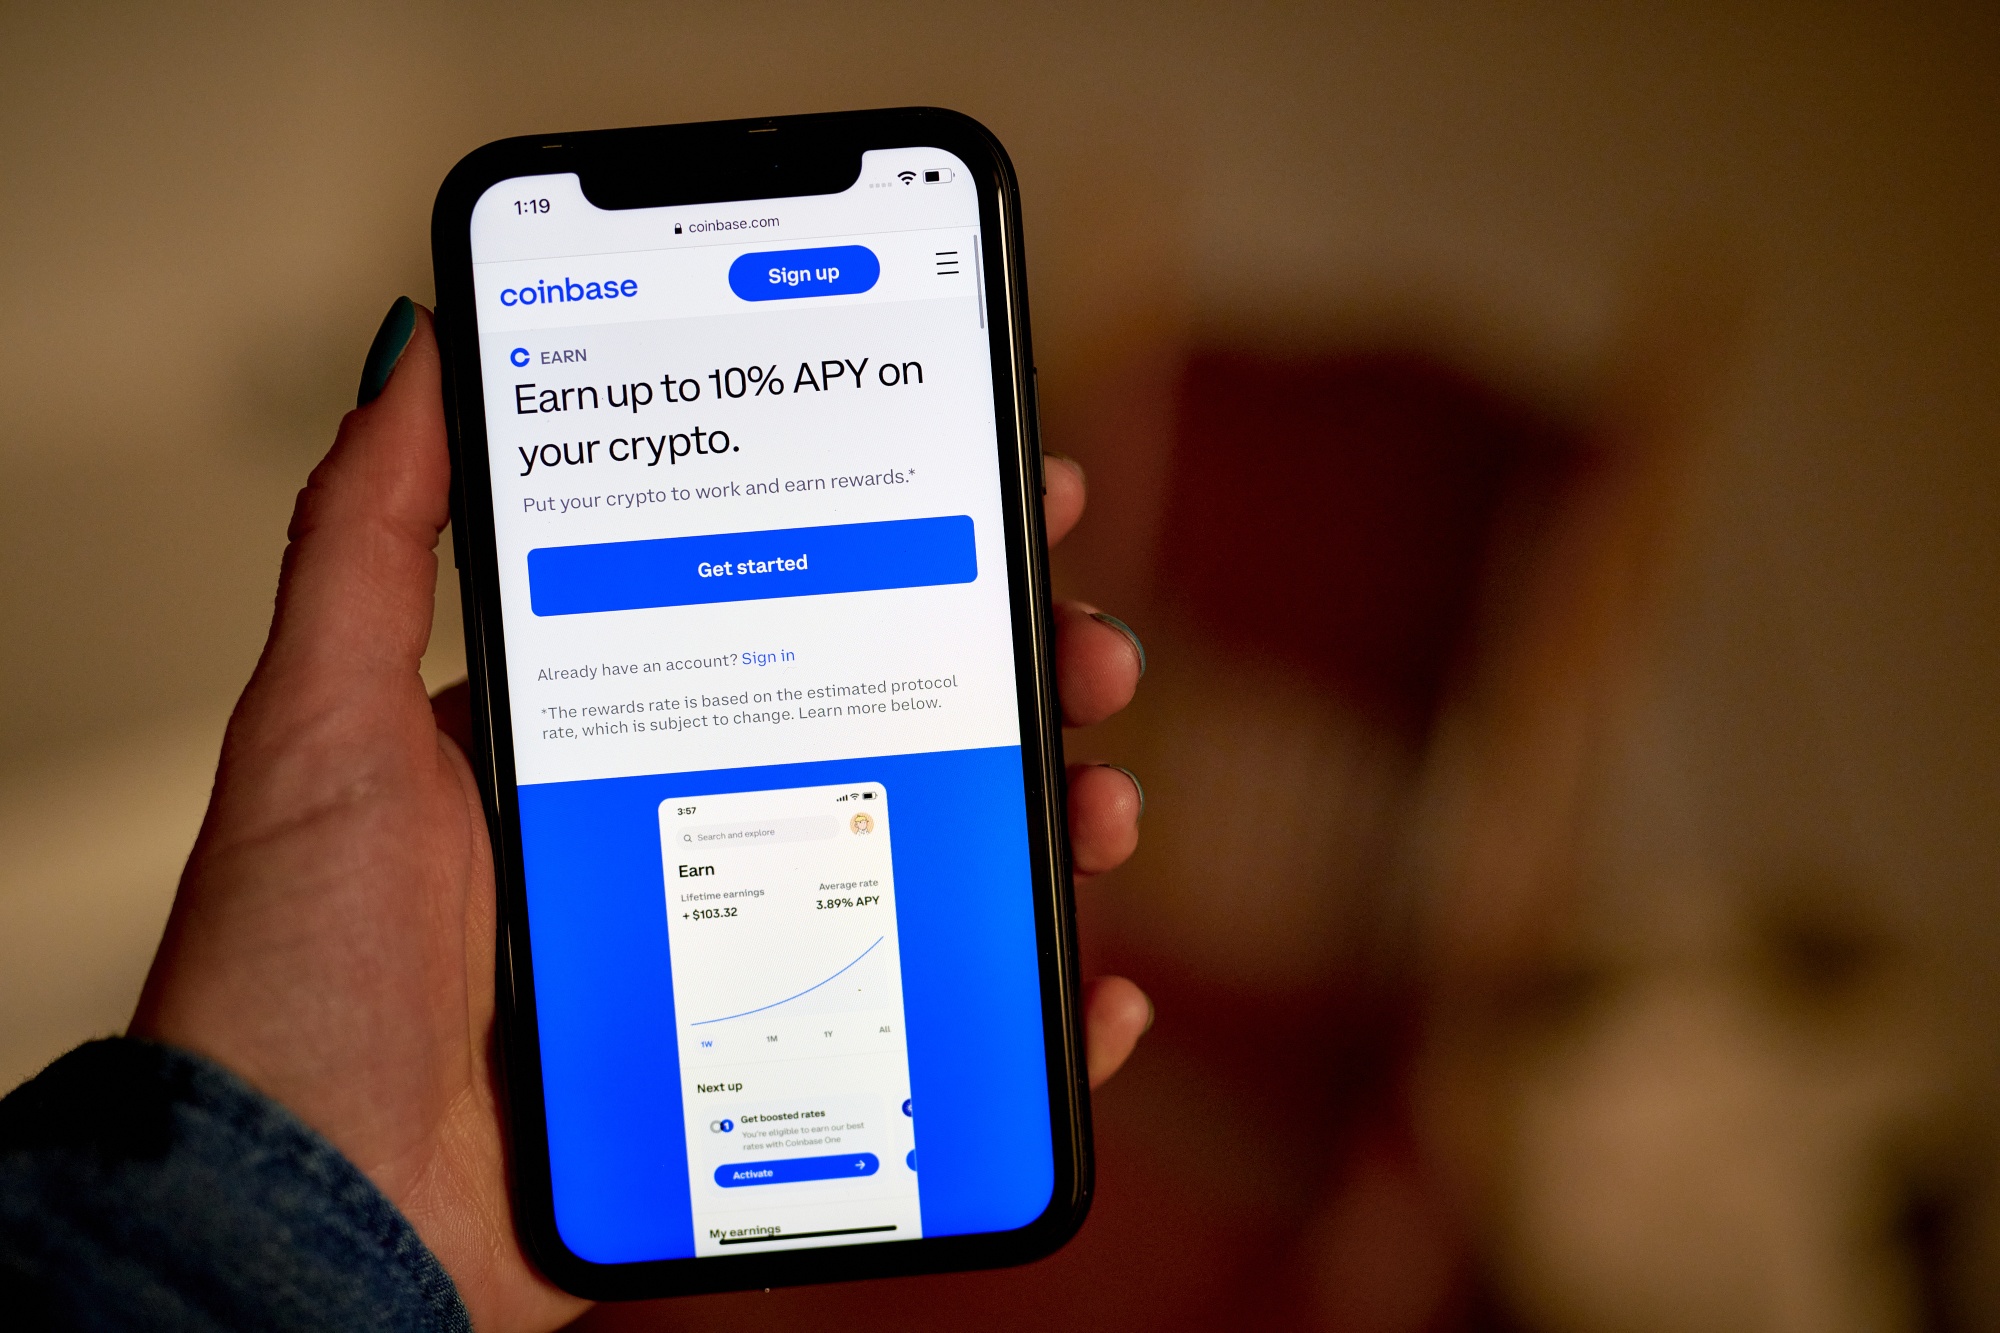 Coinbase addresses Ripple rumors, says it has made no decision on adding new coins | TechCrunch